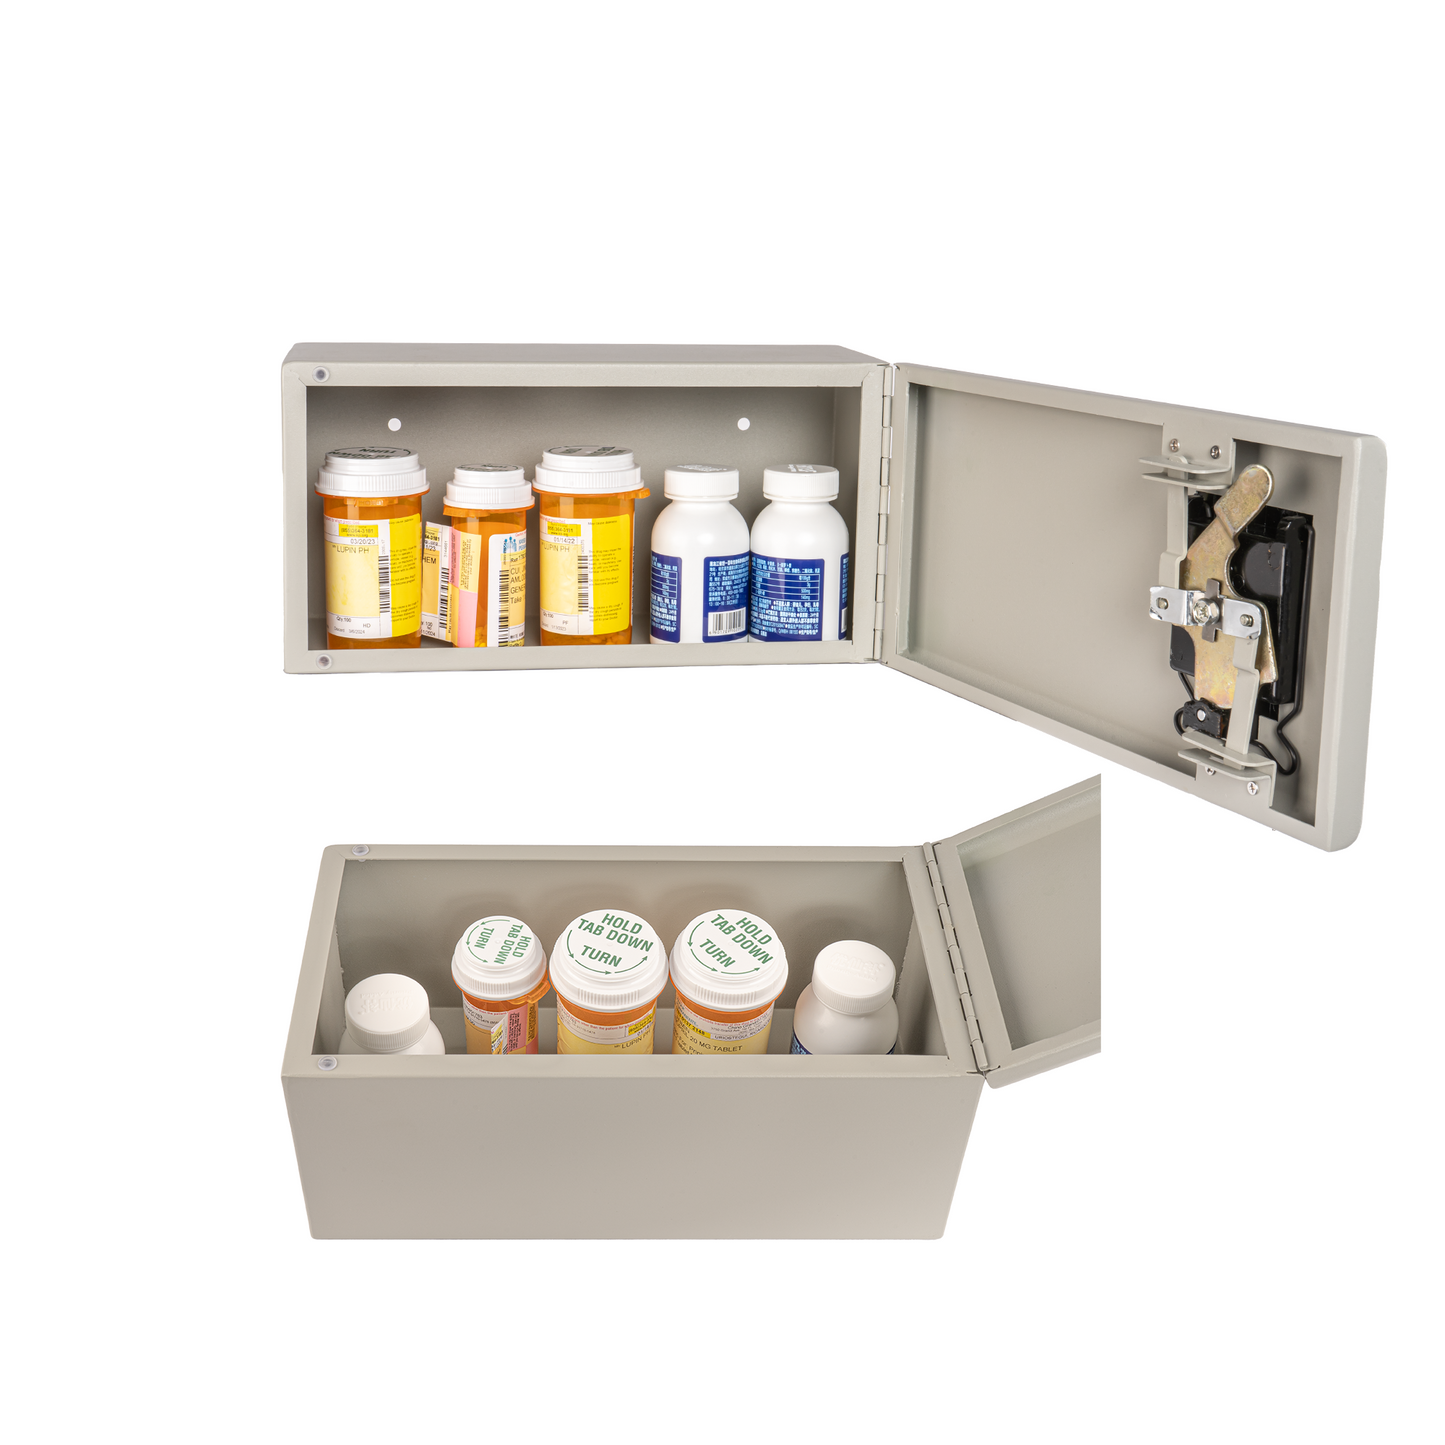 M-MC-5 - Medicine Lock Box for Medication Lock Box with Key - Wall Mounted Locking First Aid Medicine Cabinet, Secured Prescription Storage for Peace of Mind Around Kids at Home, School (White)